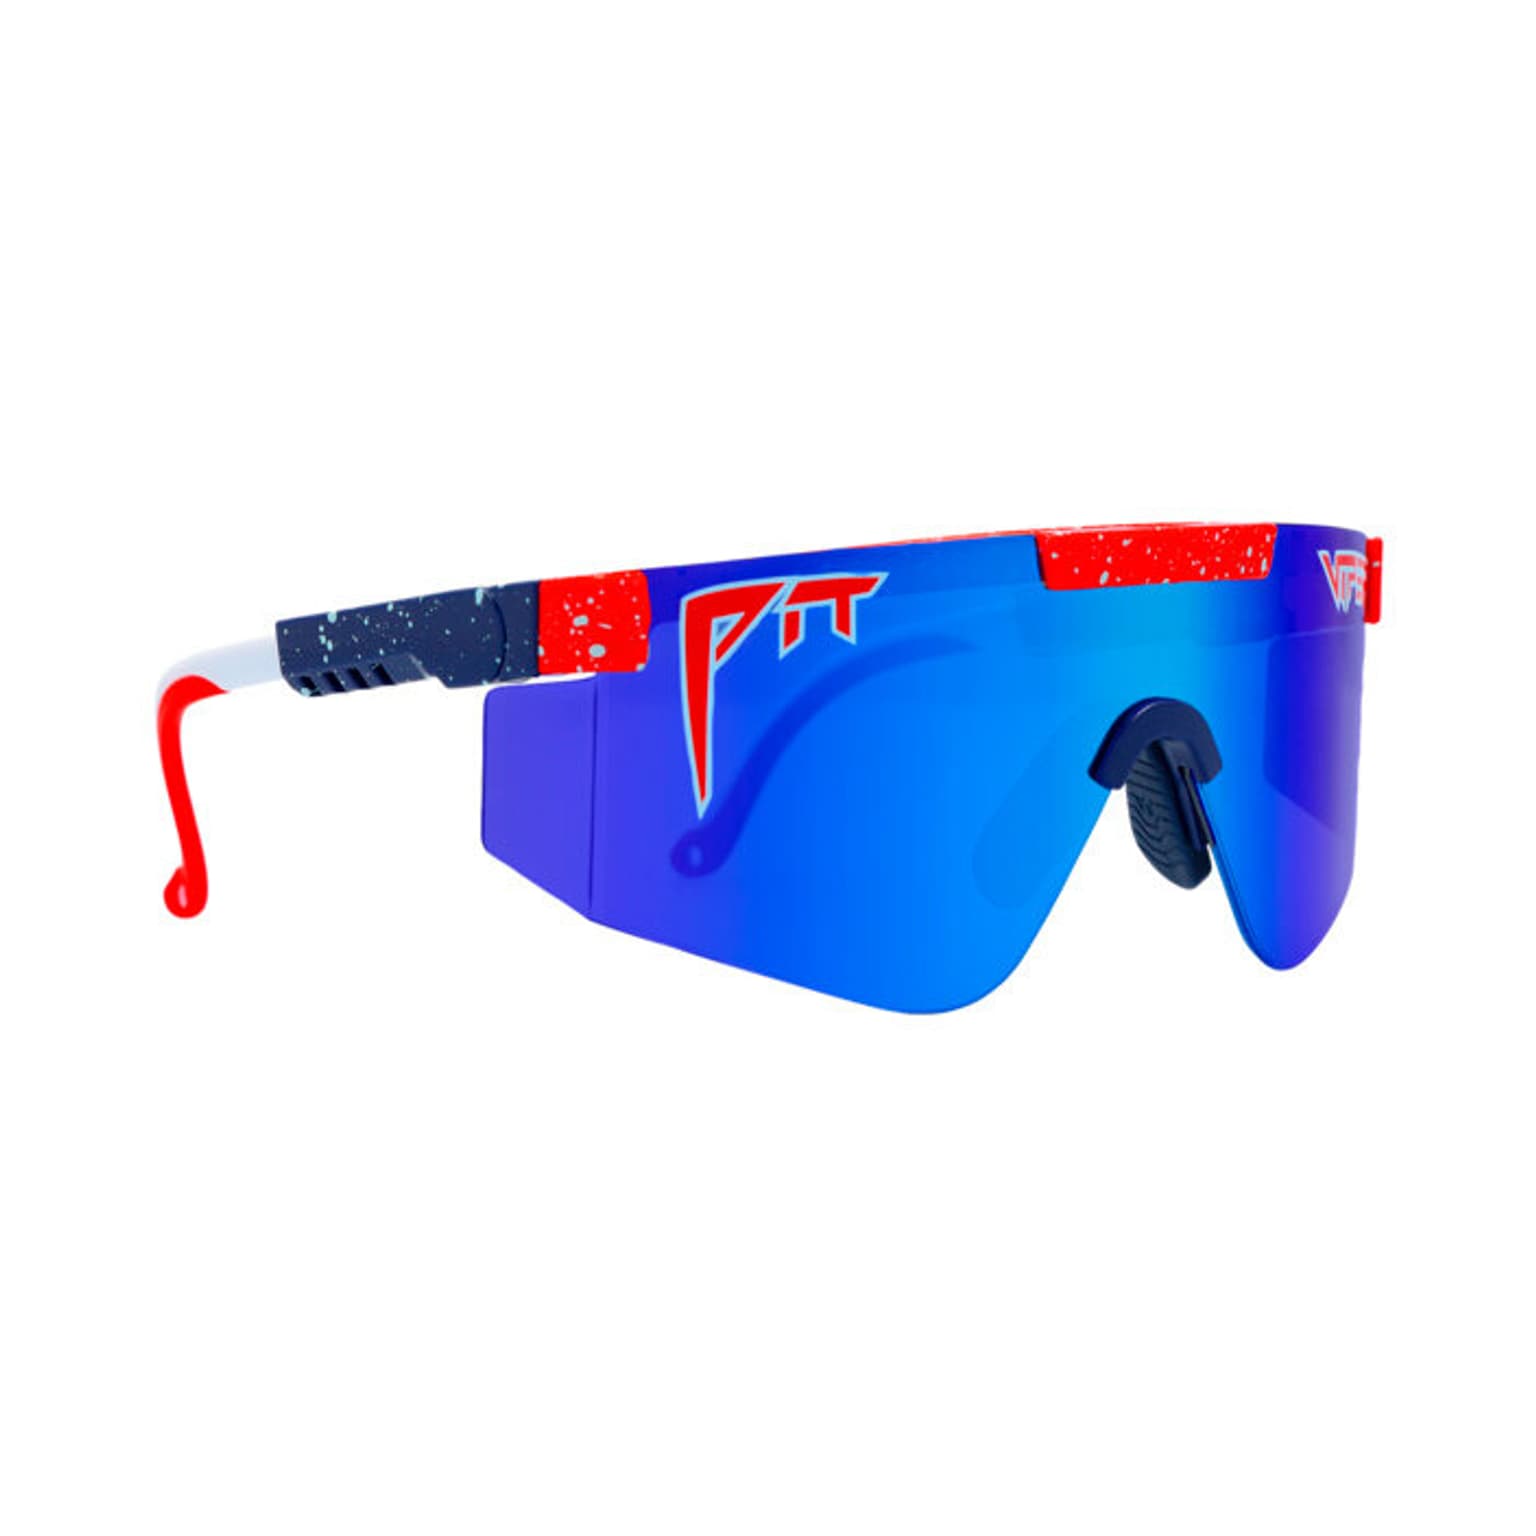 Pit Viper Pit Viper The 2000's The Basketball Team Sportbrille 1